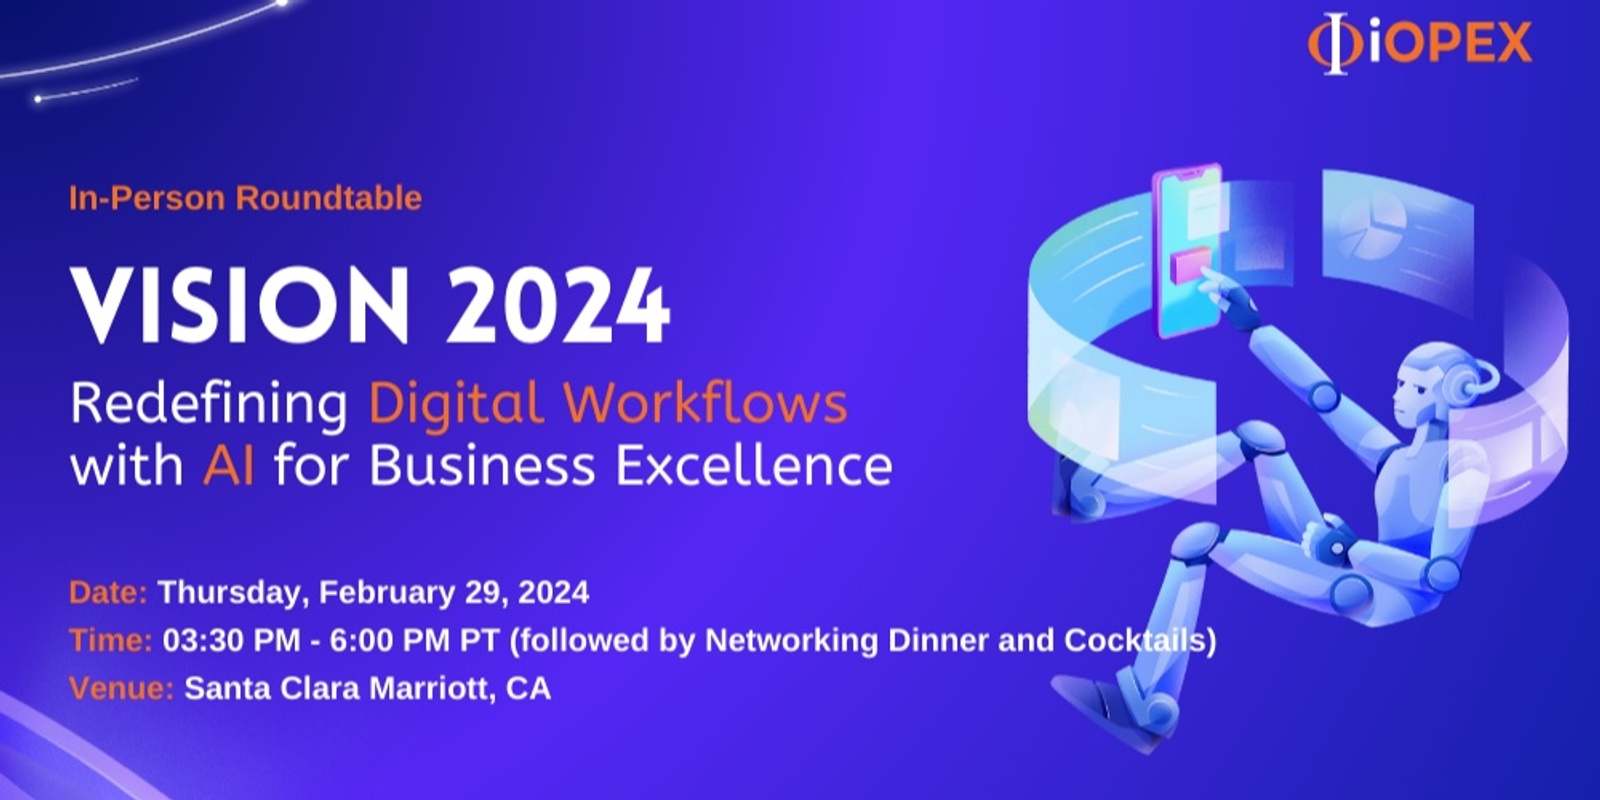 Vision 2024 Redefining Digital Workflows with AI for Business